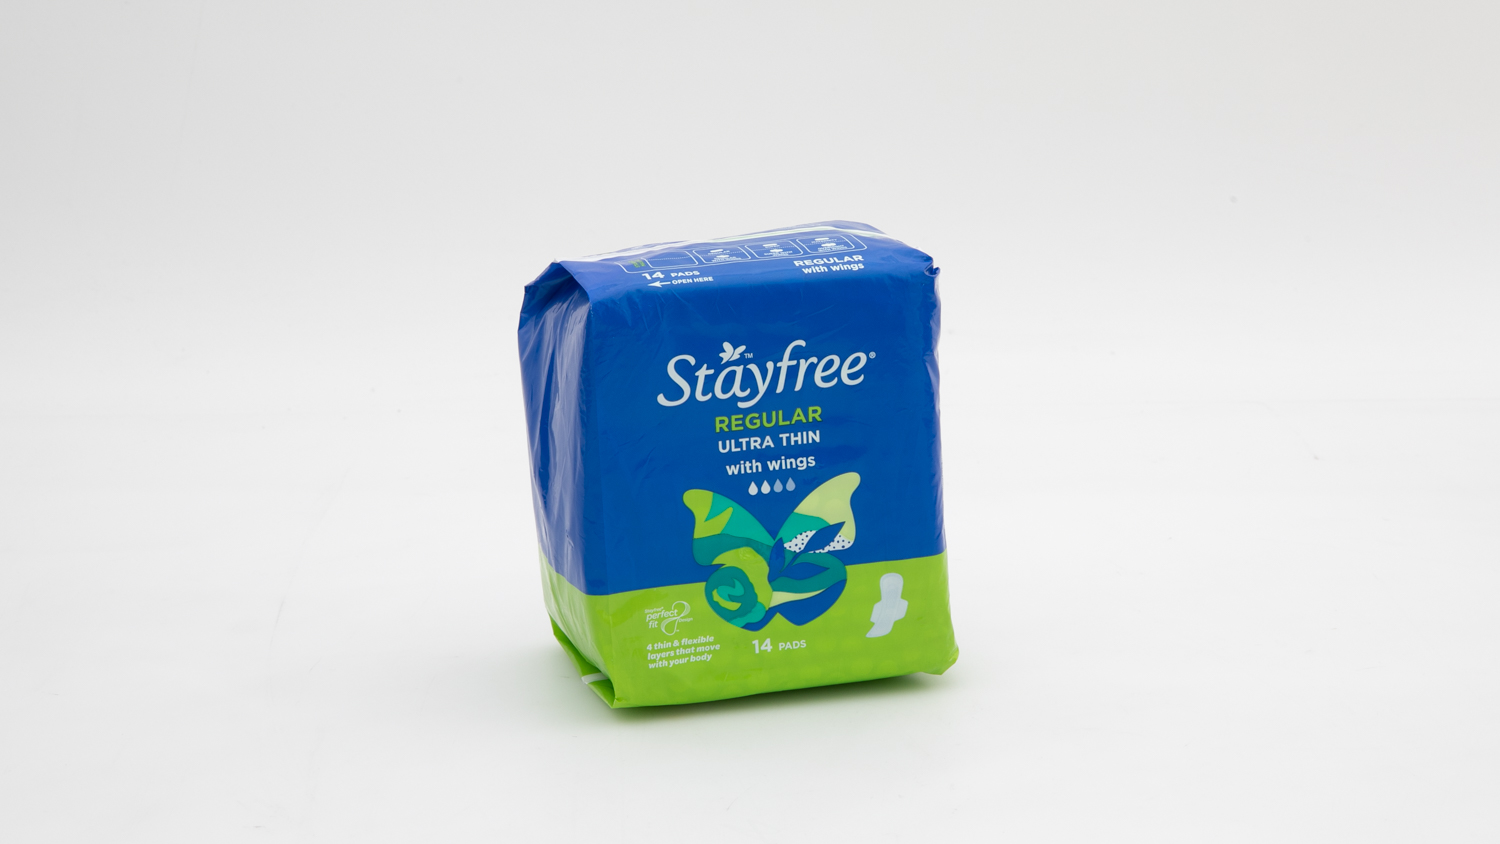 Stayfree Regular Pads Ultra Thin with wings carousel image